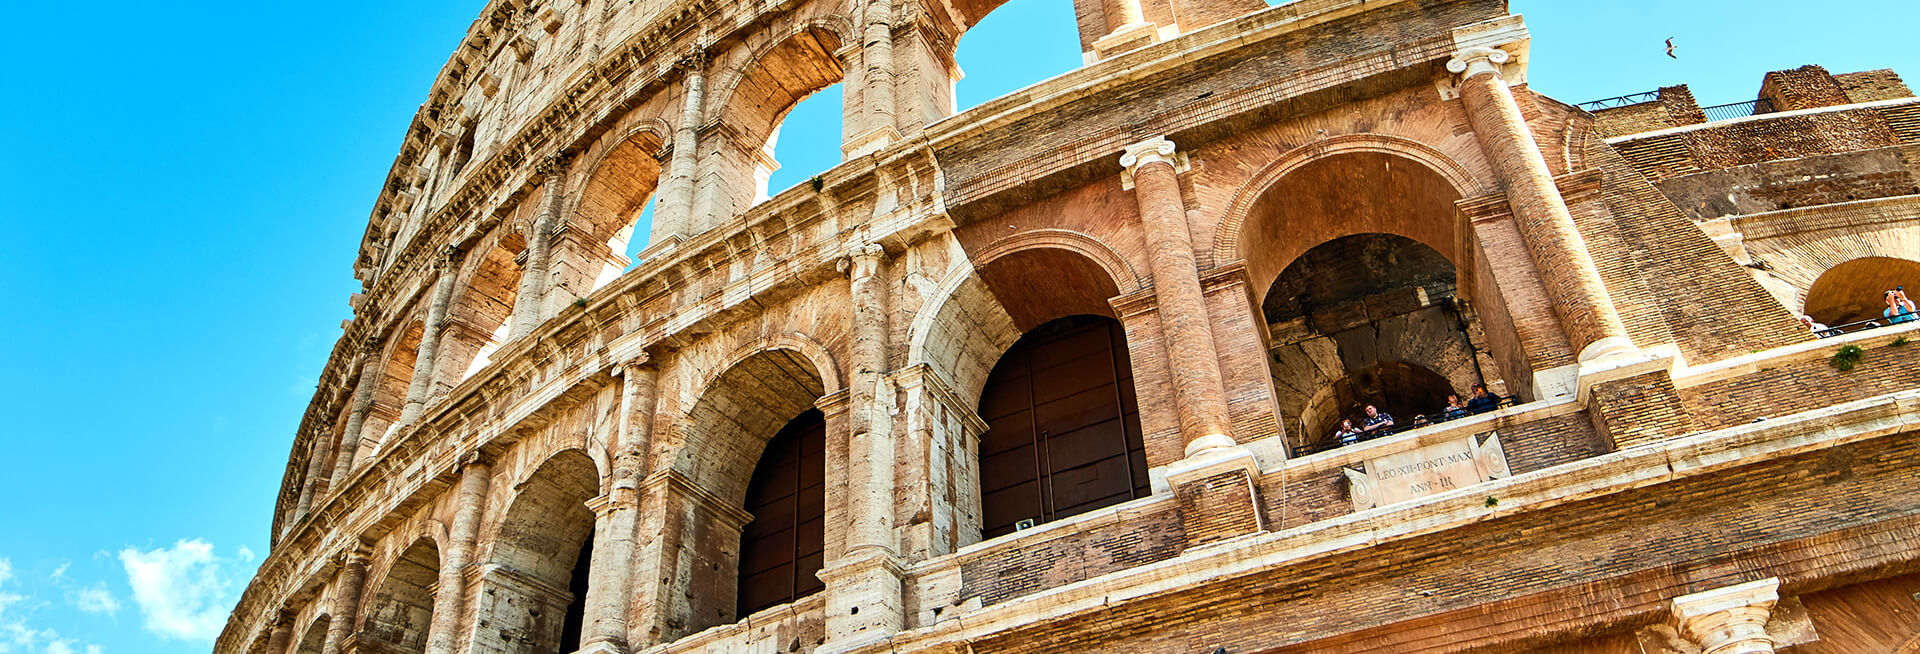 best places to visit in italy - rome